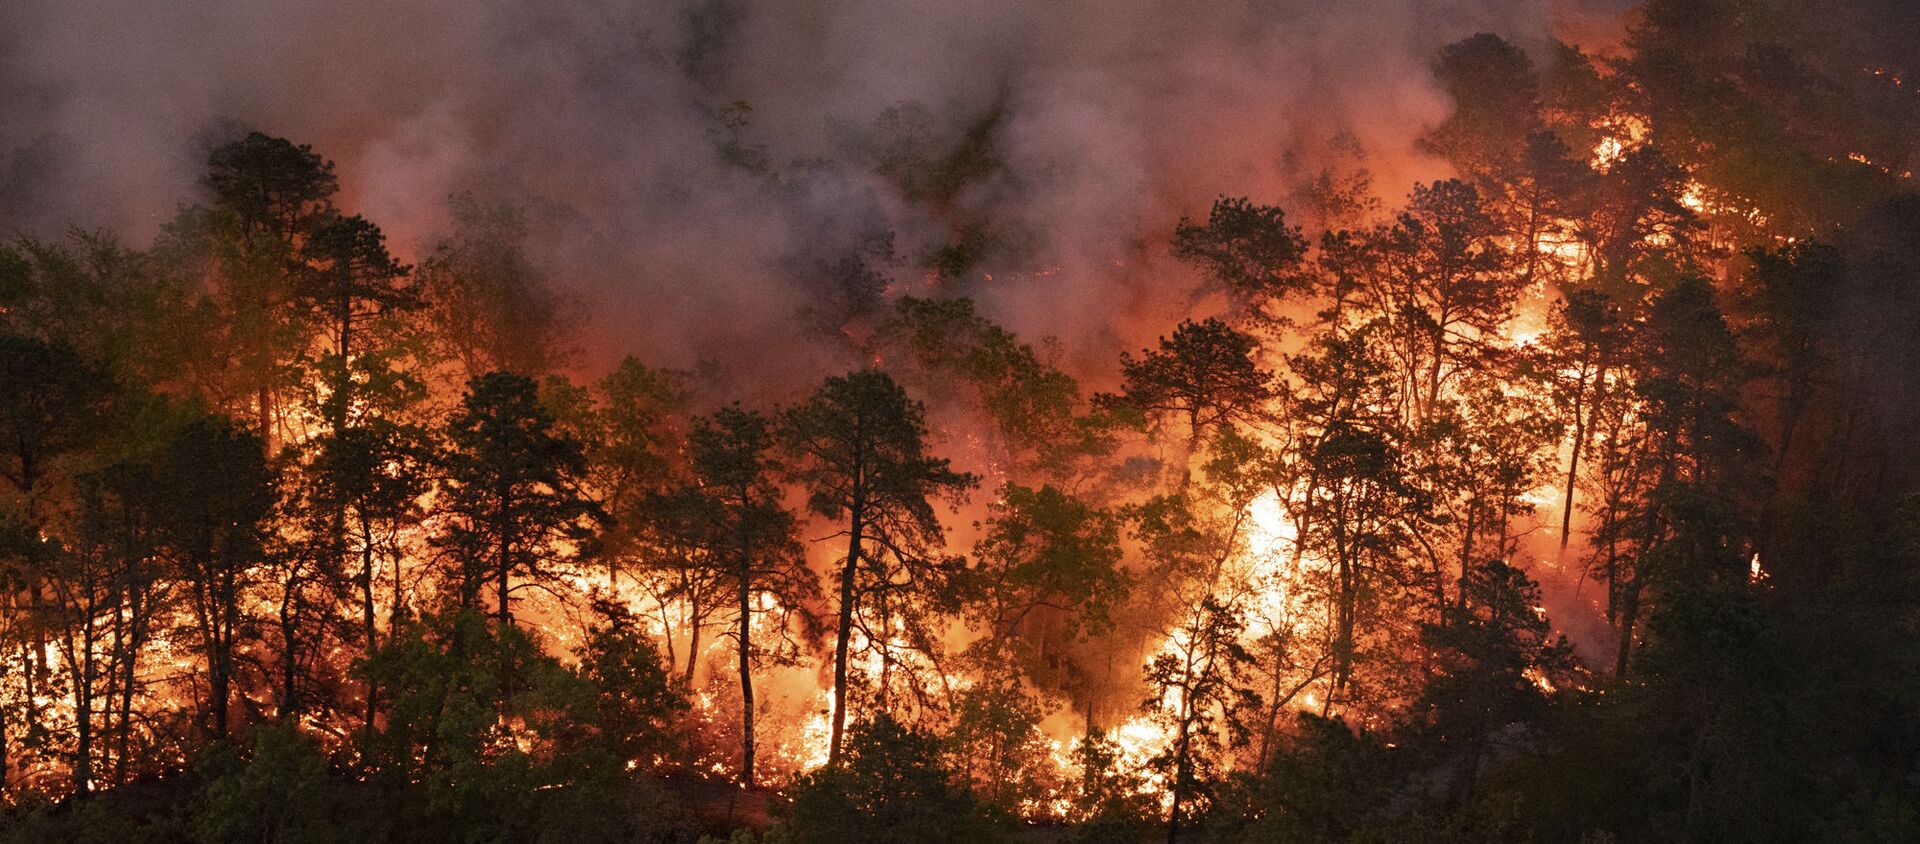 In this photo provided by New Jersey Department of Environmental Protection, a forest fire burns in Little Egg Harbor Township, N.J., on Sunday, May 16, 2021. ( New Jersey Department of Environmental Protection via AP) - Sputnik International, 1920, 07.07.2021